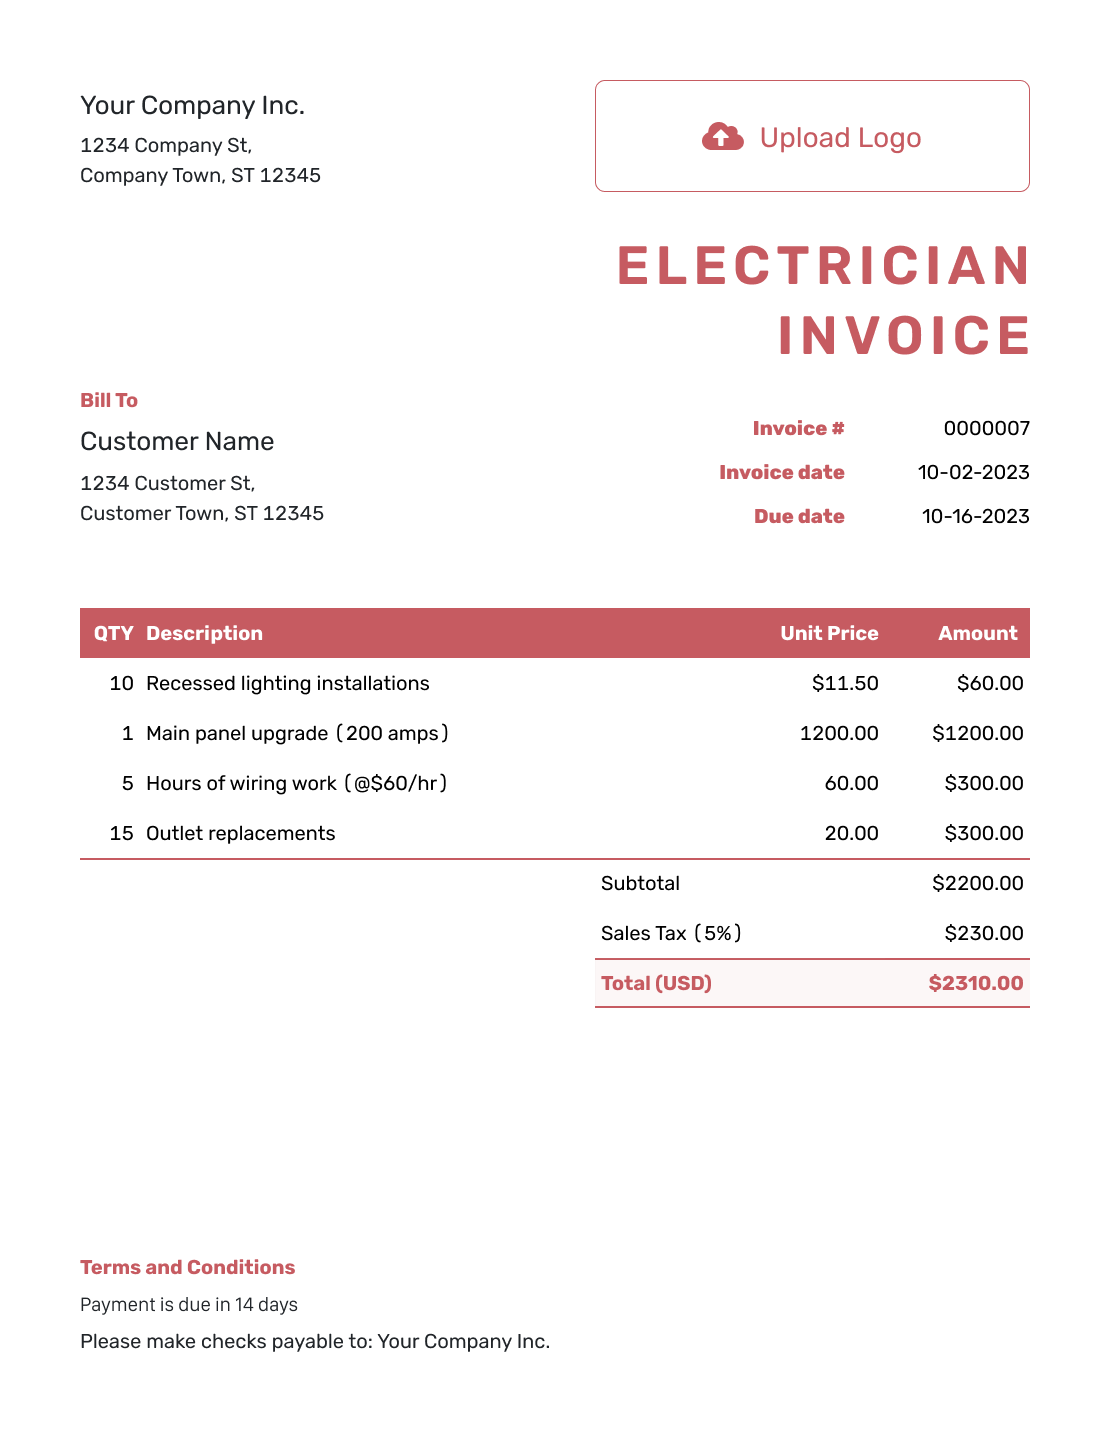 Itemized Electrician Invoice Template